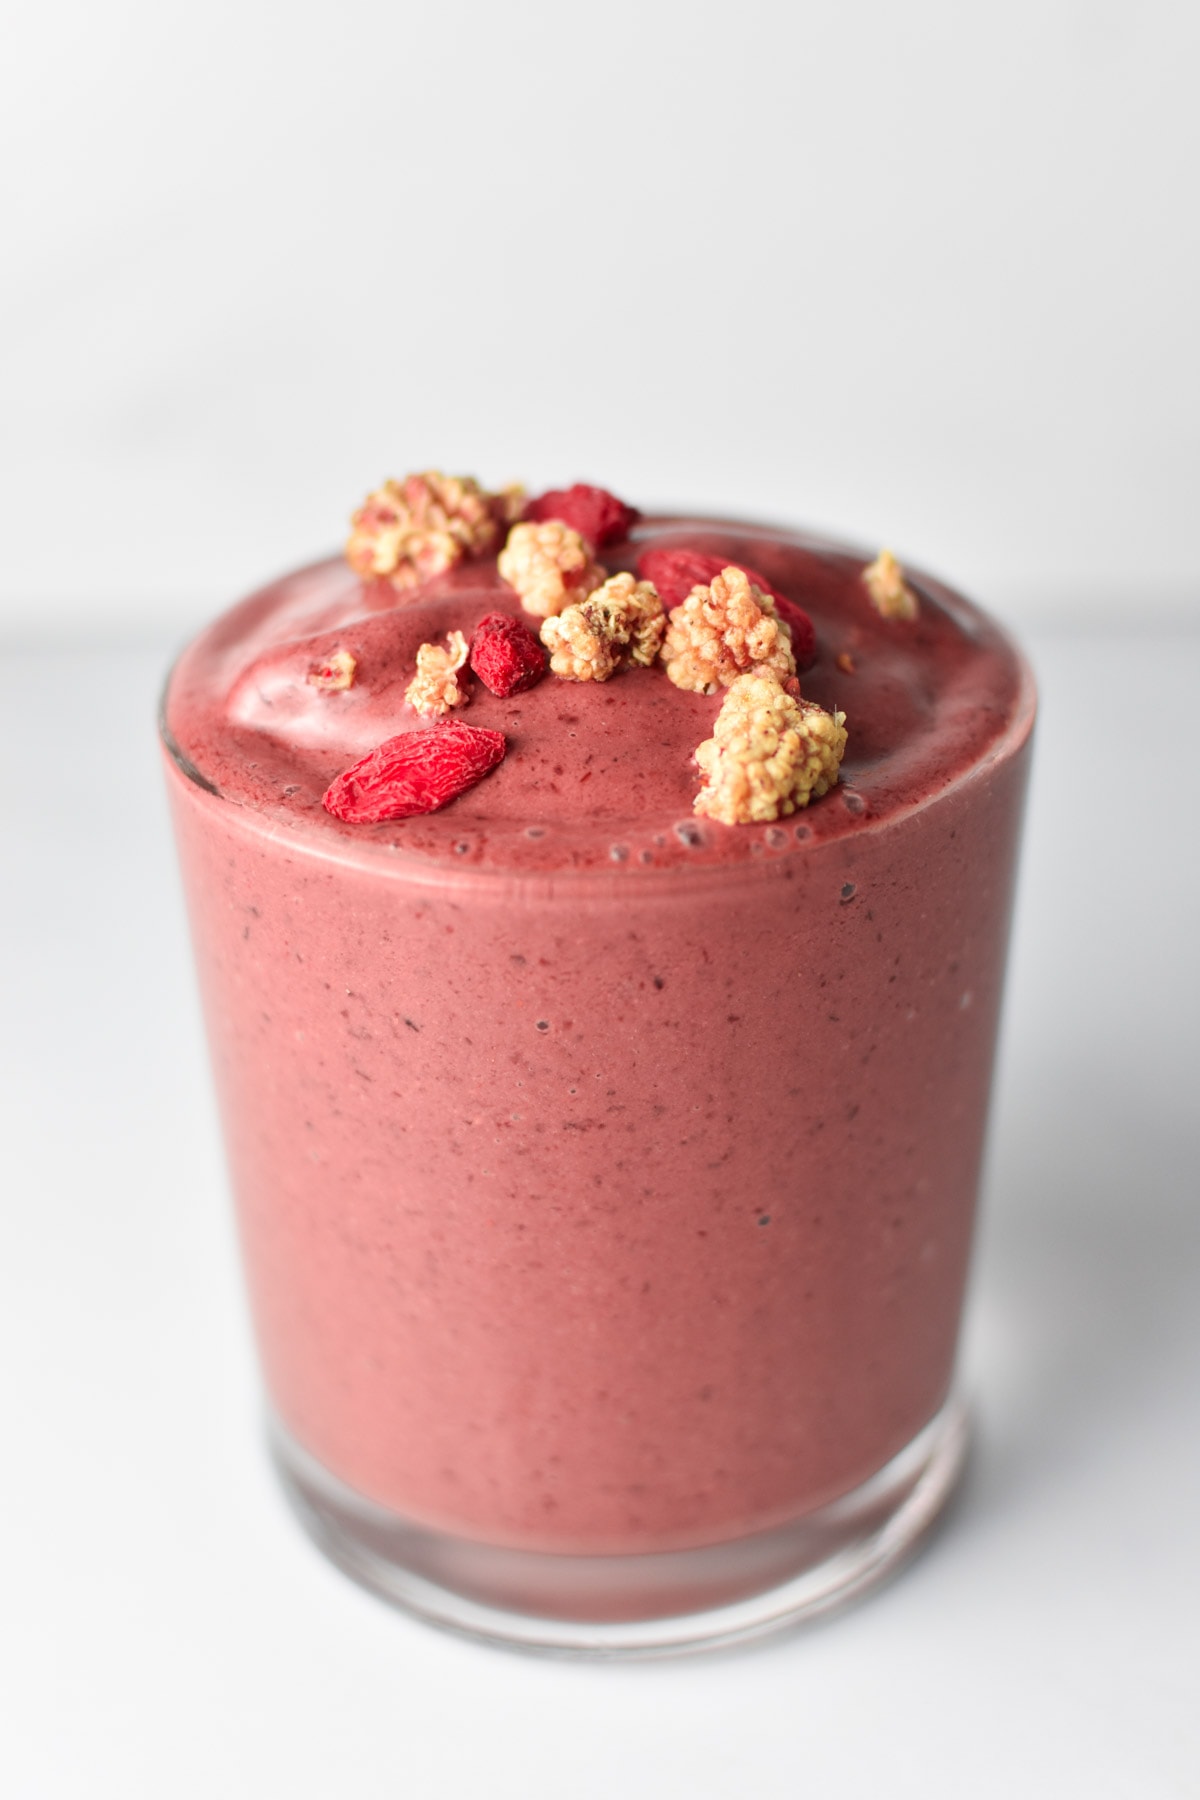 A fruit smoothie topped with goji berries on a table.